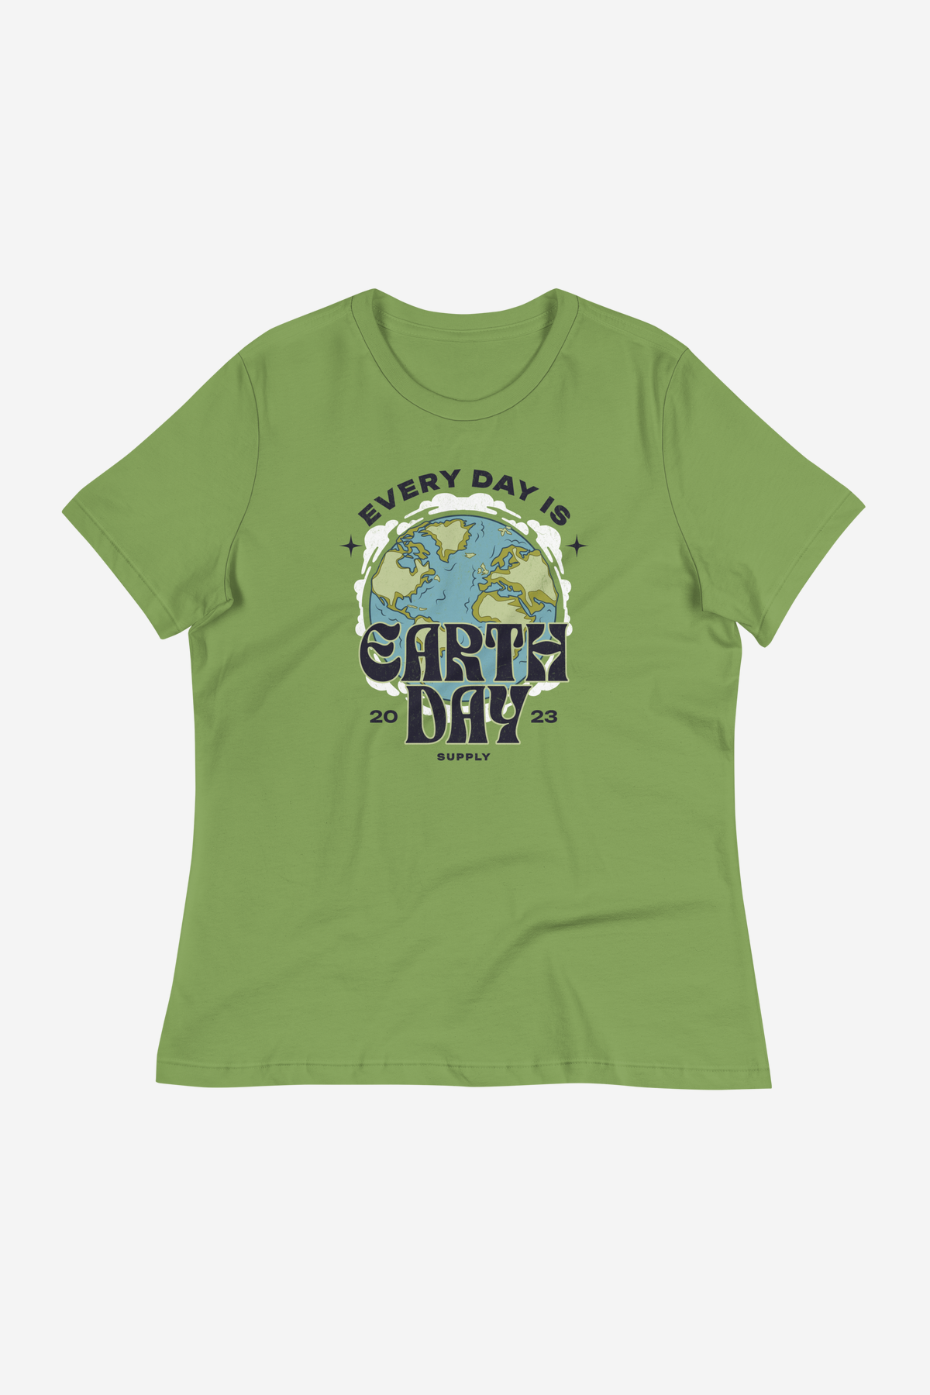 Every day is Earth Day Women's Relaxed T-Shirt